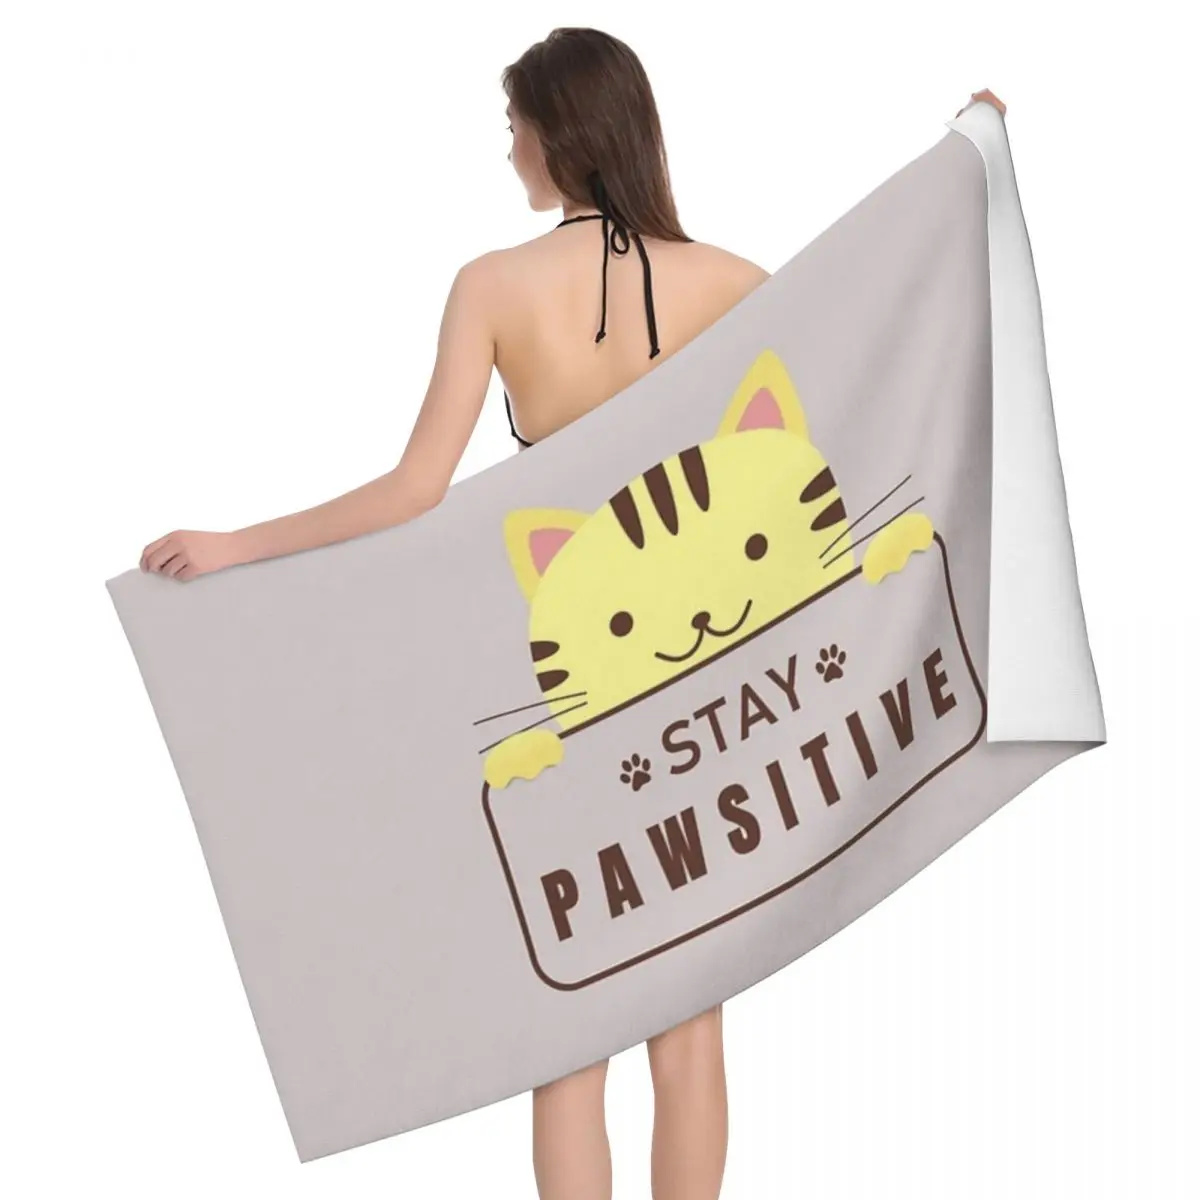 

Stay Pawsitive (3) 80x130cm Bath Towel Water-absorbent For Travelling Holiday Gift